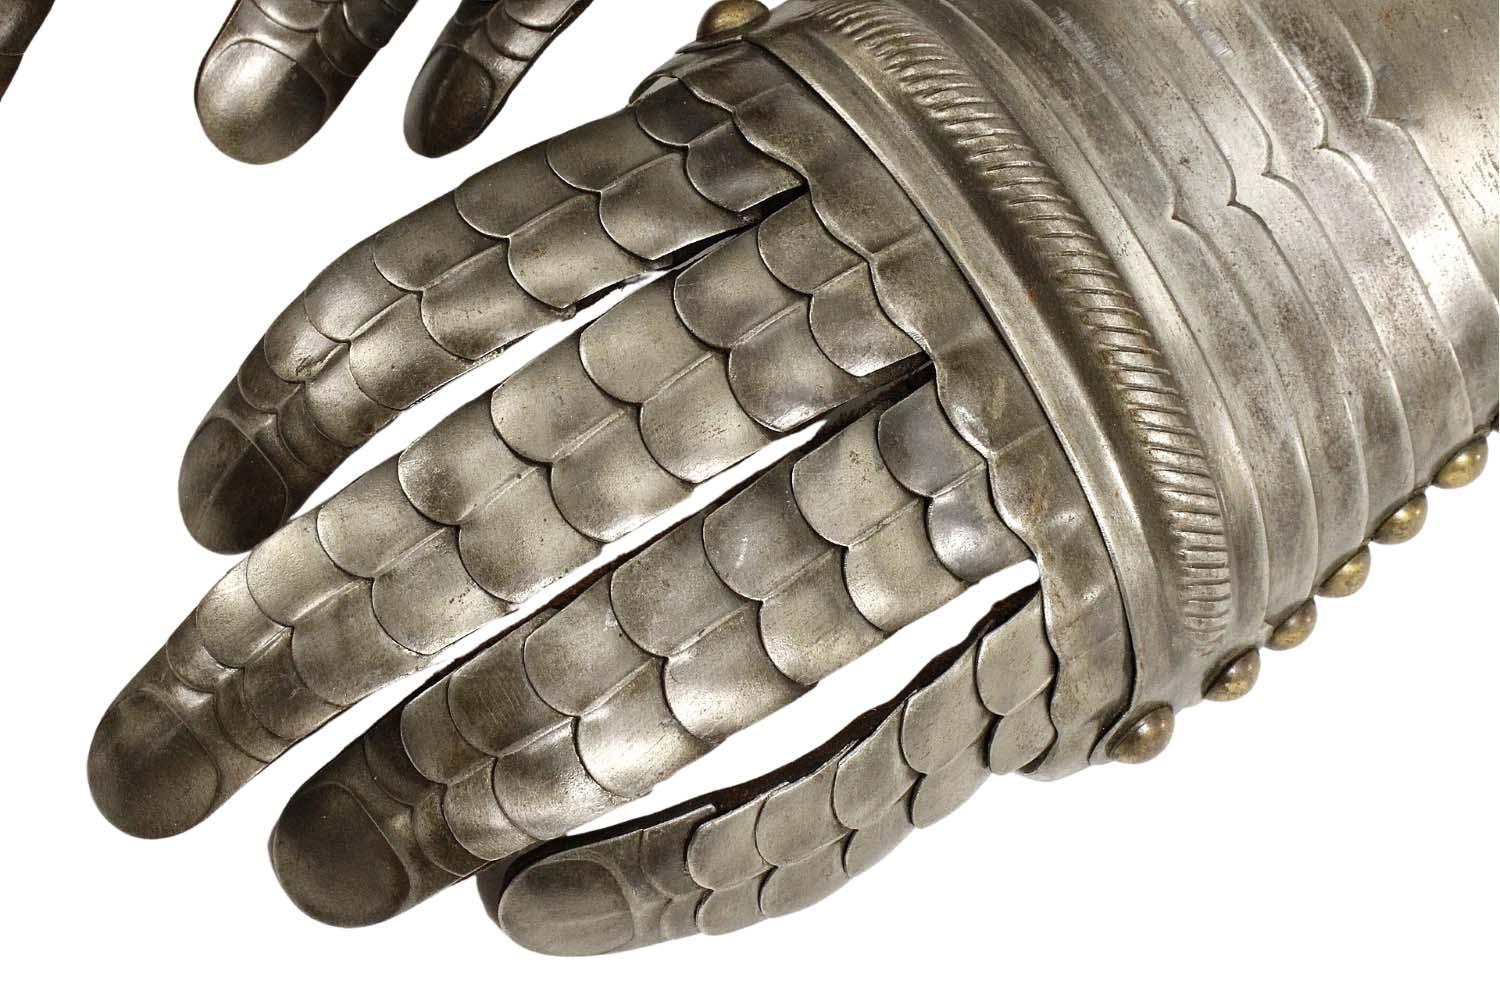 Very Attractive Victorian Pair Of 16th-17th C. Style Knight's Armor Gauntlets With Etched Decorations. Complete With Original Leather Strapping Fully Intact